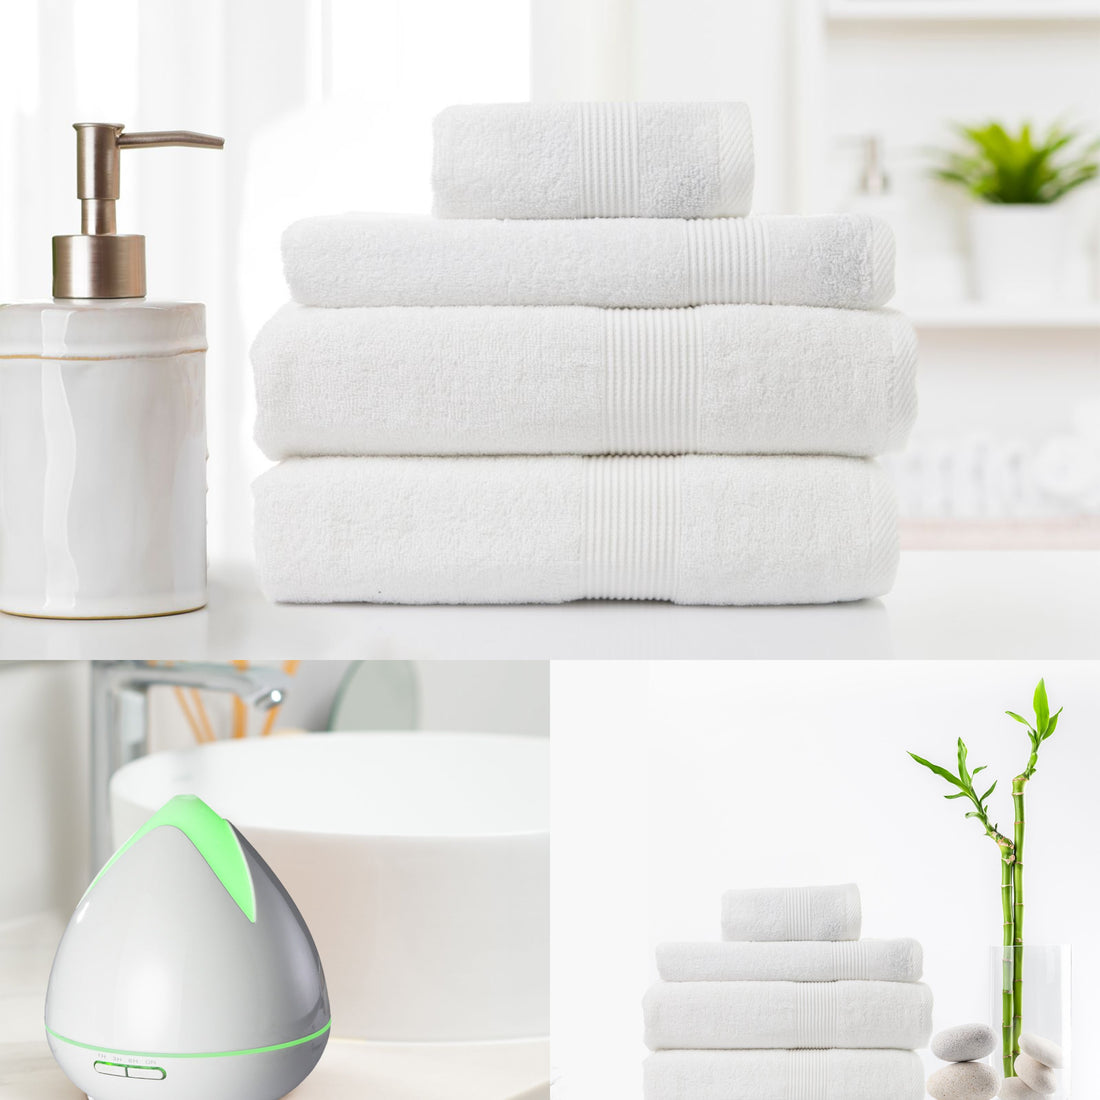 PureSpa Diffuser Humidifier And 4 Pack Bamboo Towel Set Bundle-Towels-PEROZ Accessories